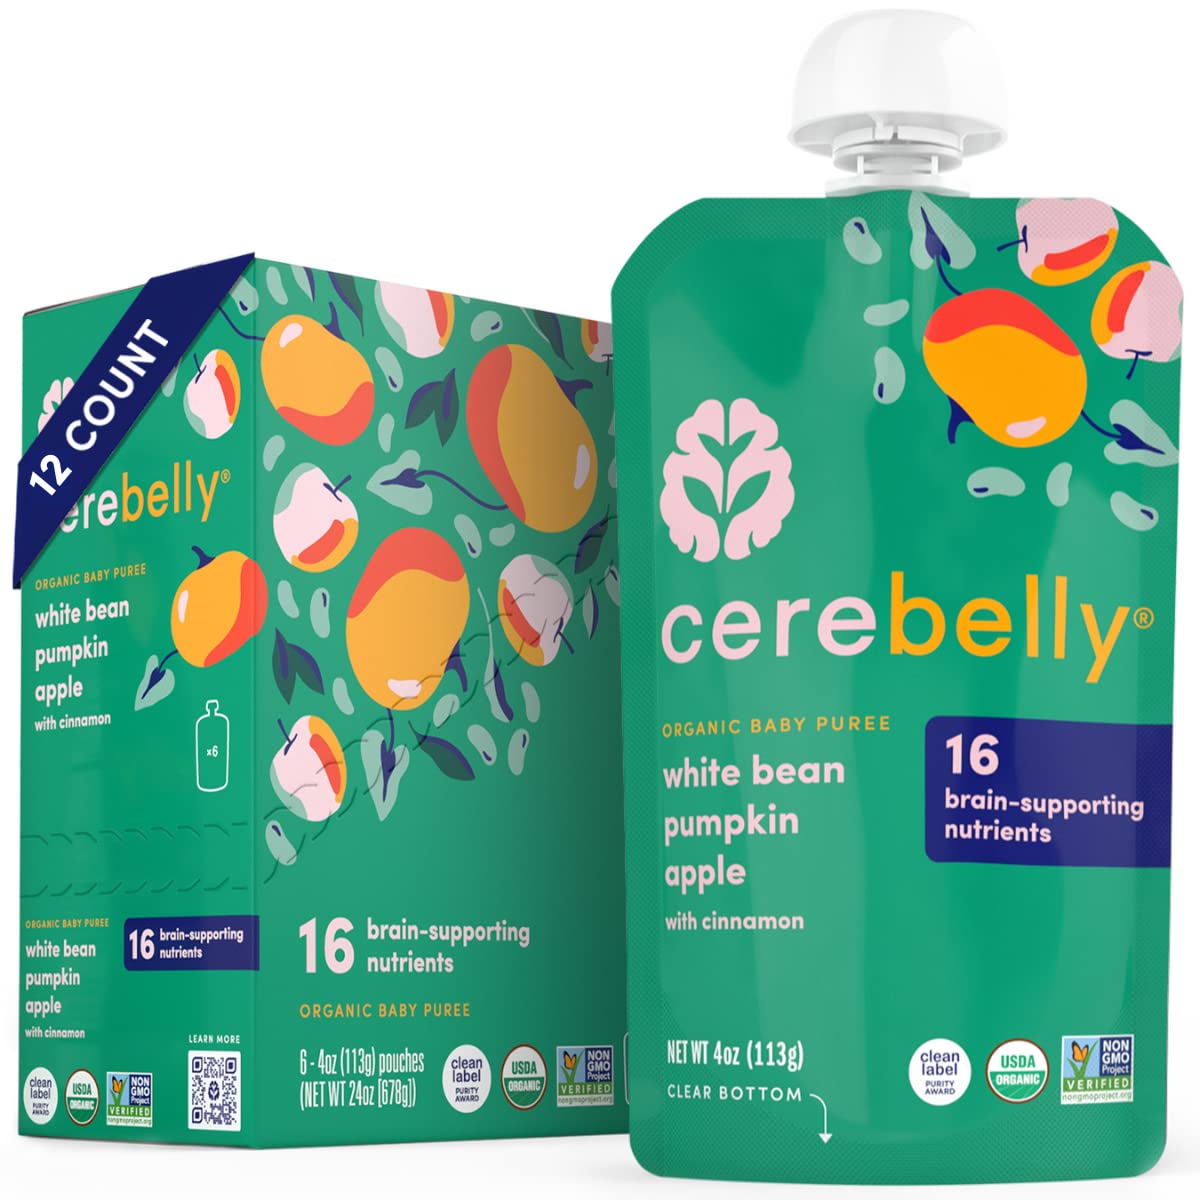 Cerebelly Baby Food Pouches – Organic White Bean Pumpkin Apple (4 oz, Pack of 12) - Toddler Snacks - 16 Brain-Supporting Nutrients - Healthy Snacks, Made with Gluten-Free Ingredients, No Added Sugar